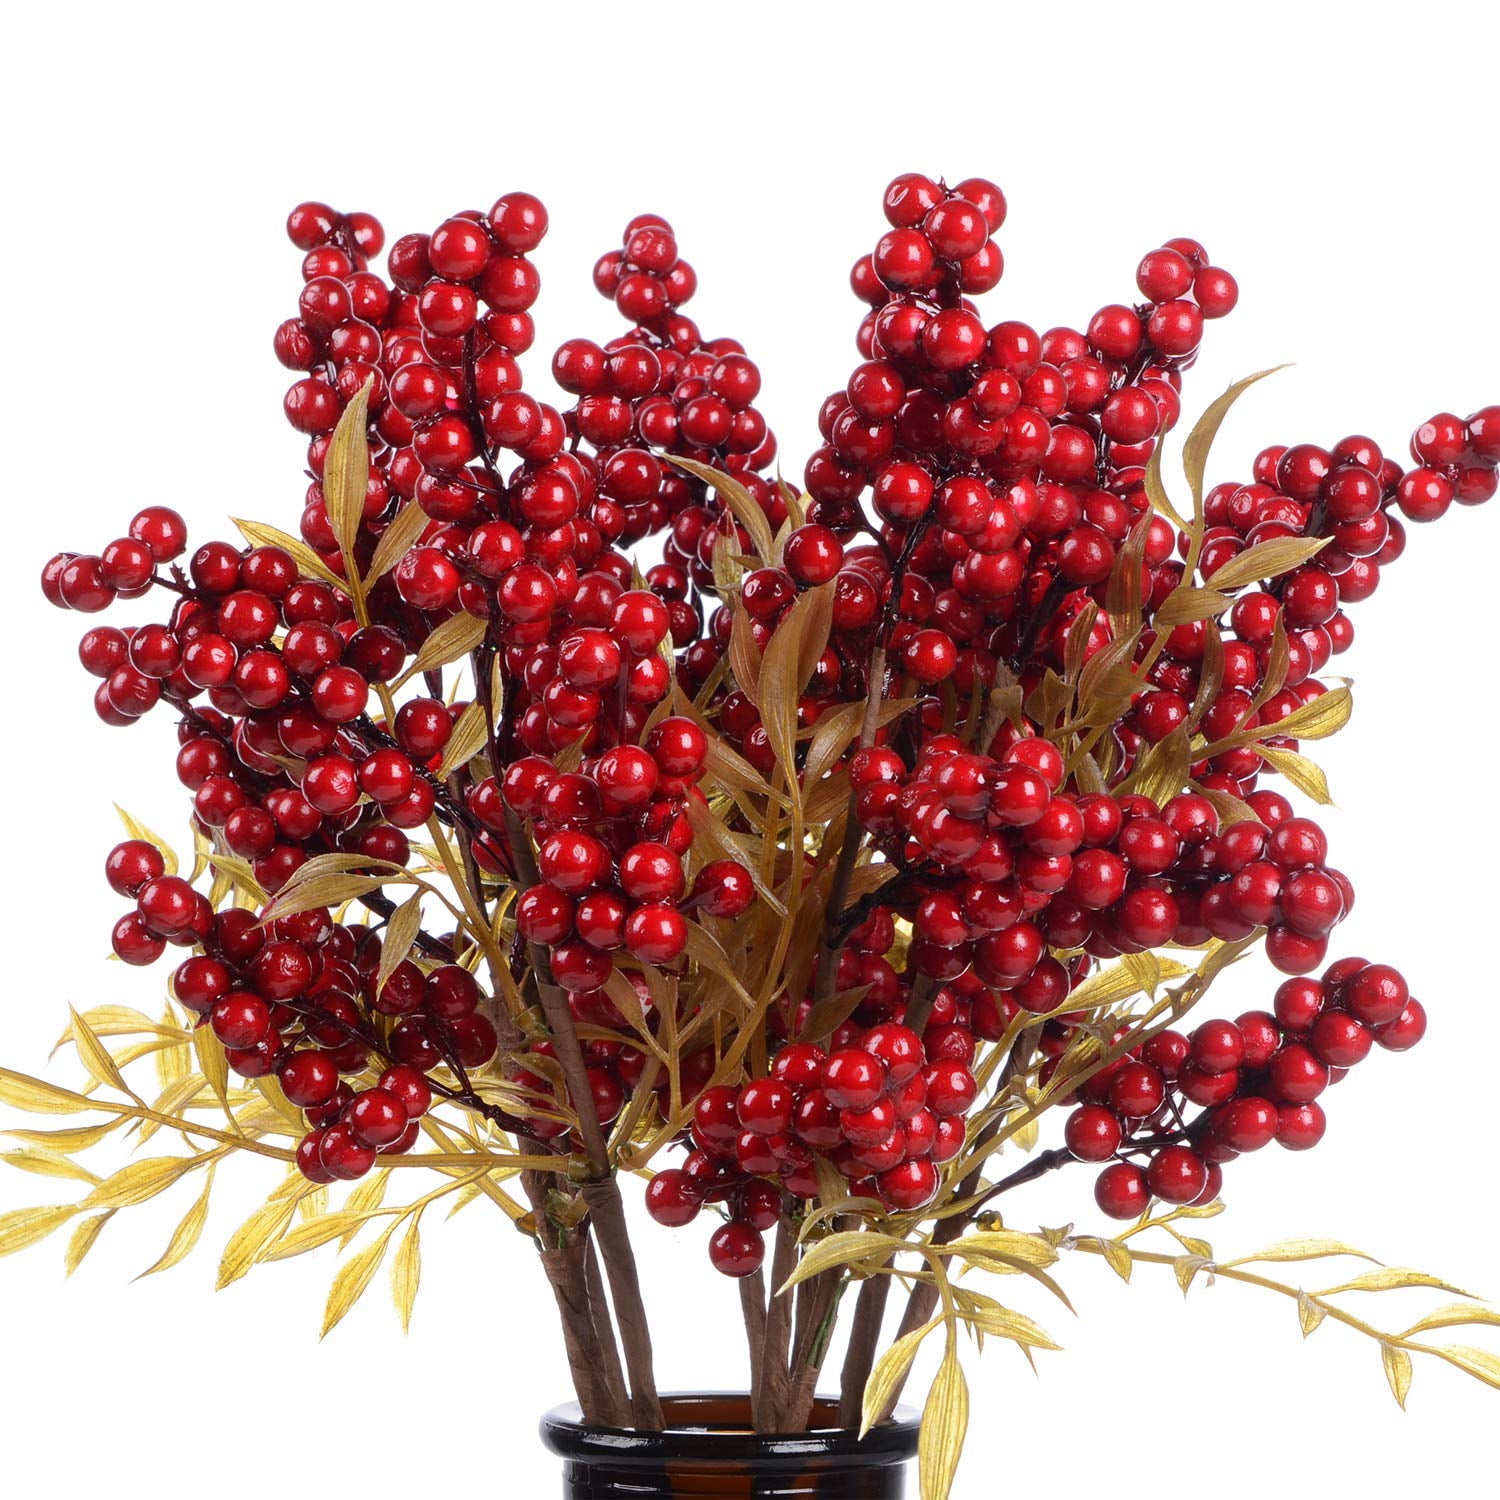 EXCEART 6pcs Artificial Red Berry Stems Red Berry Picks Holly Berries Branches Christmas Red Berry Picks for Christmas Tree Ornaments Xmas Wreath Decoration